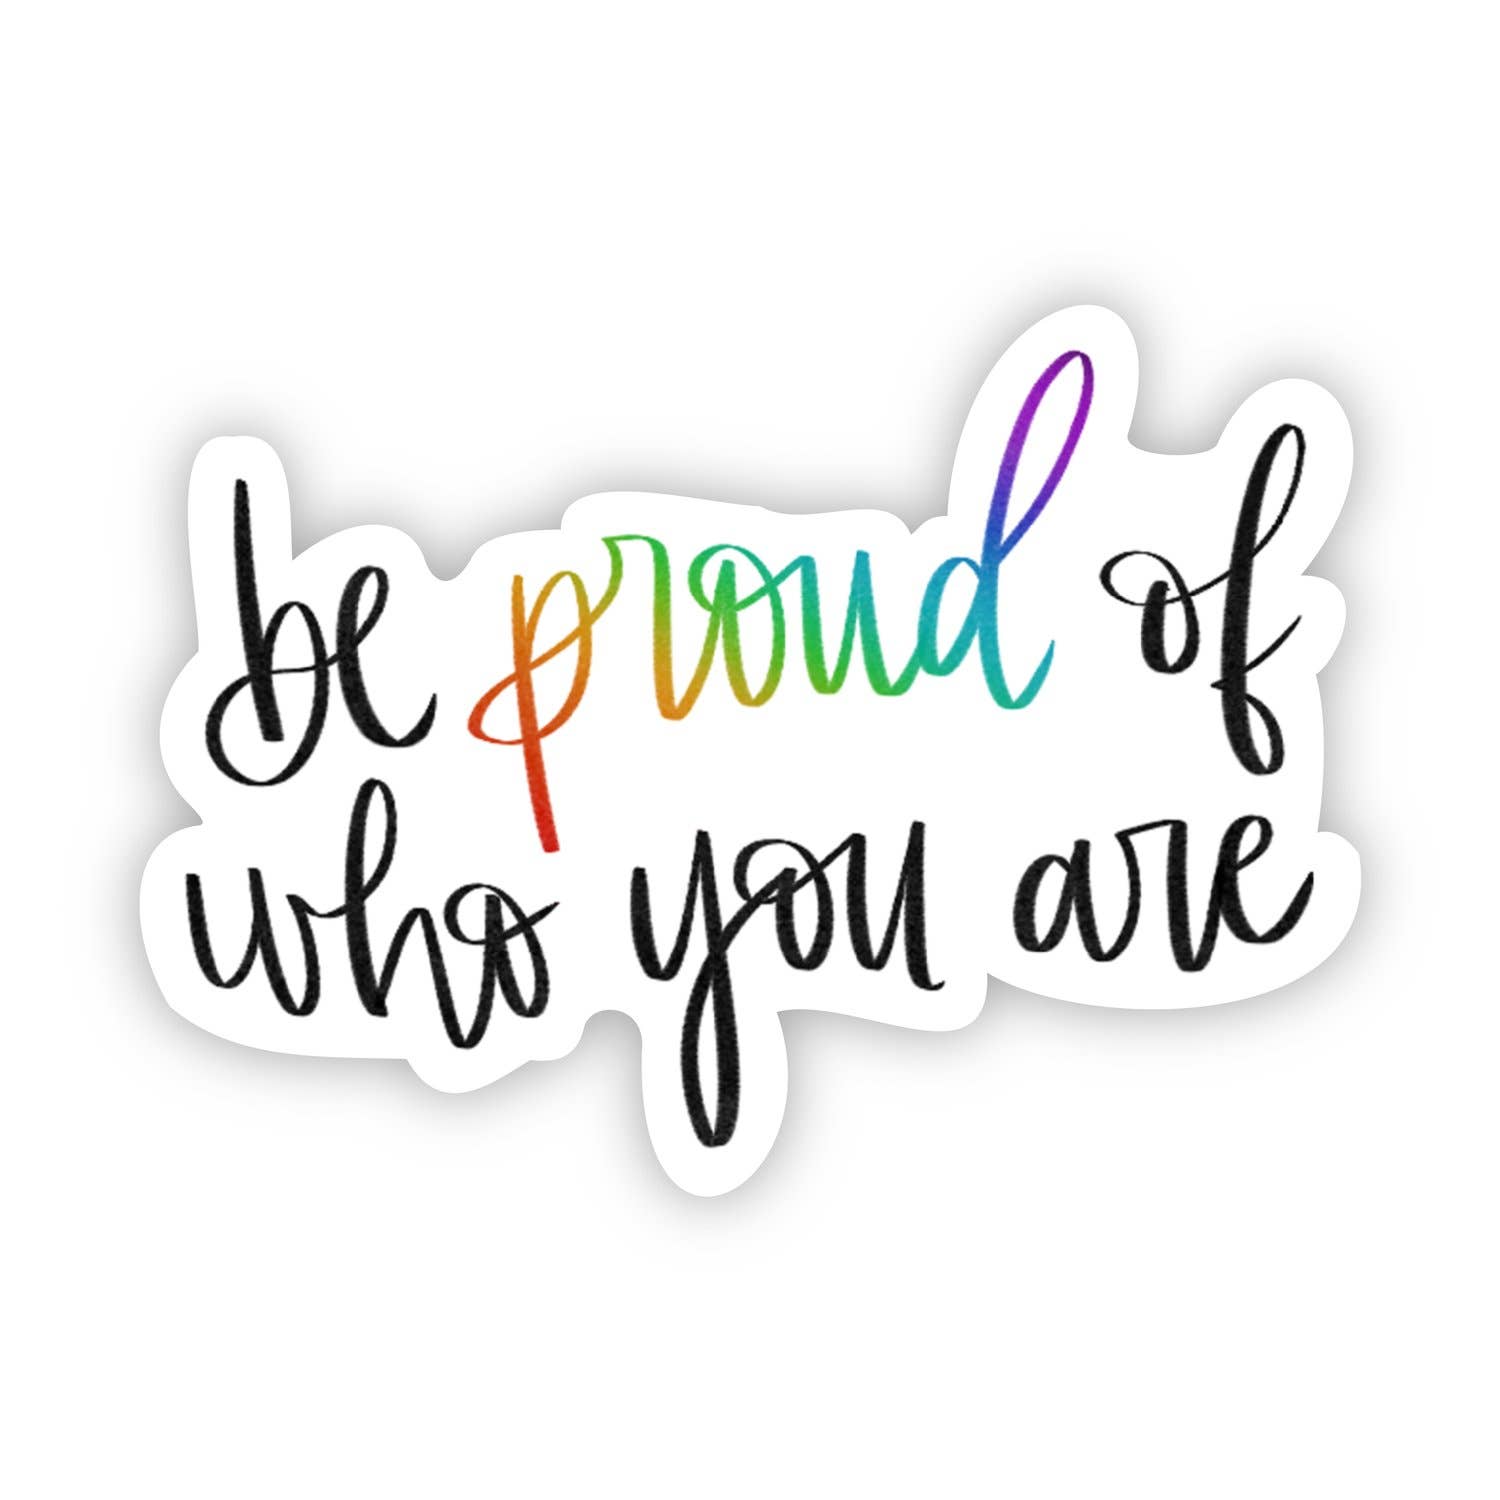 Be proud of who you are sticker